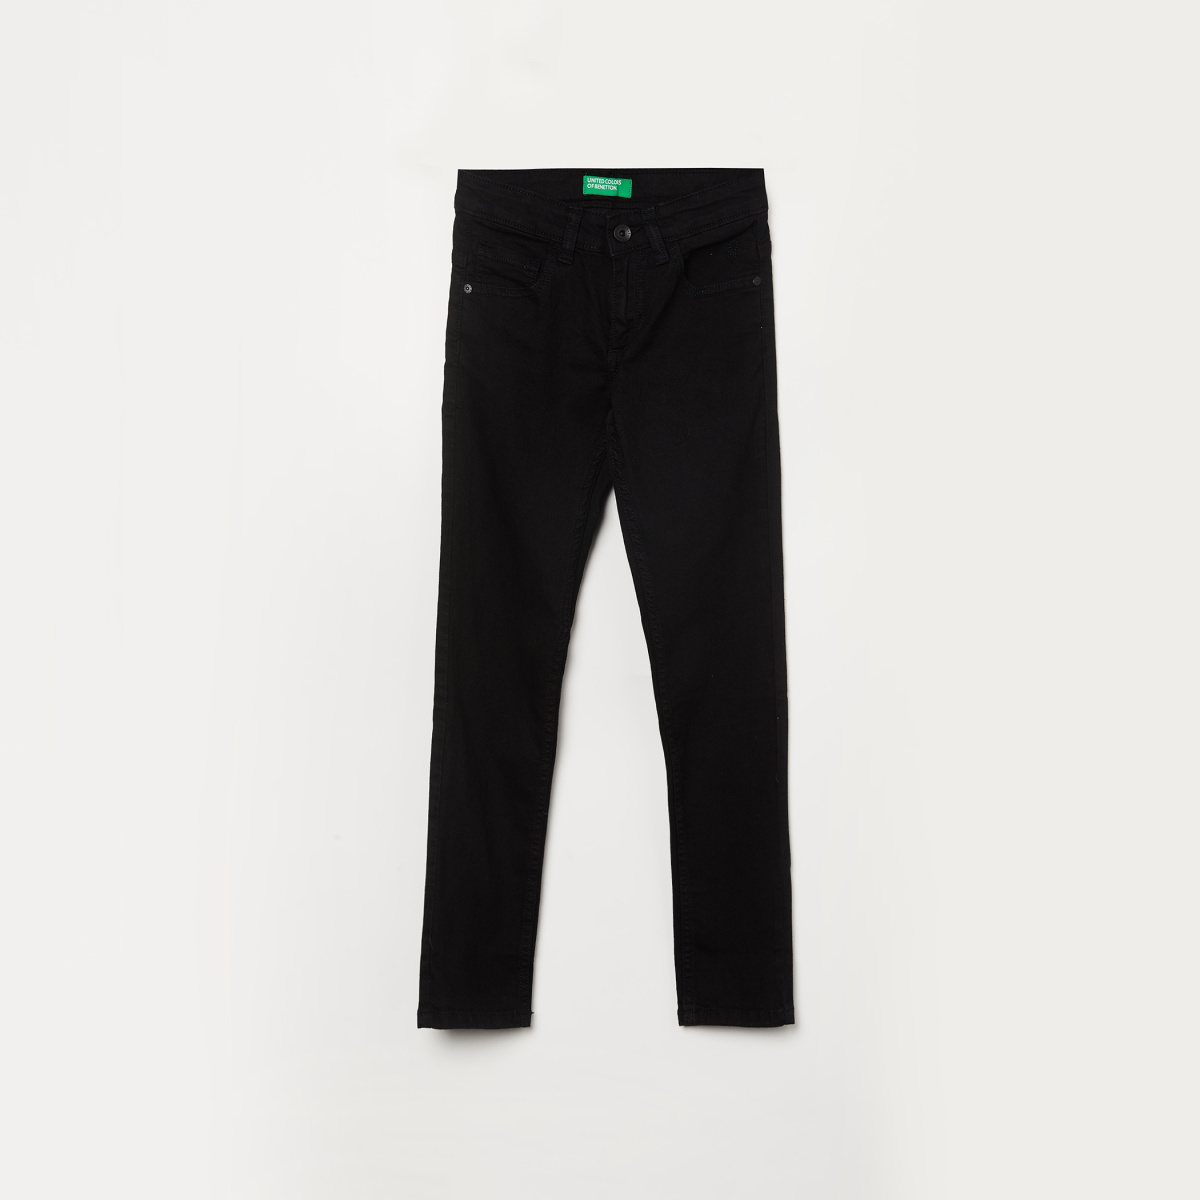 United Colors of Benetton Pantalons Fille